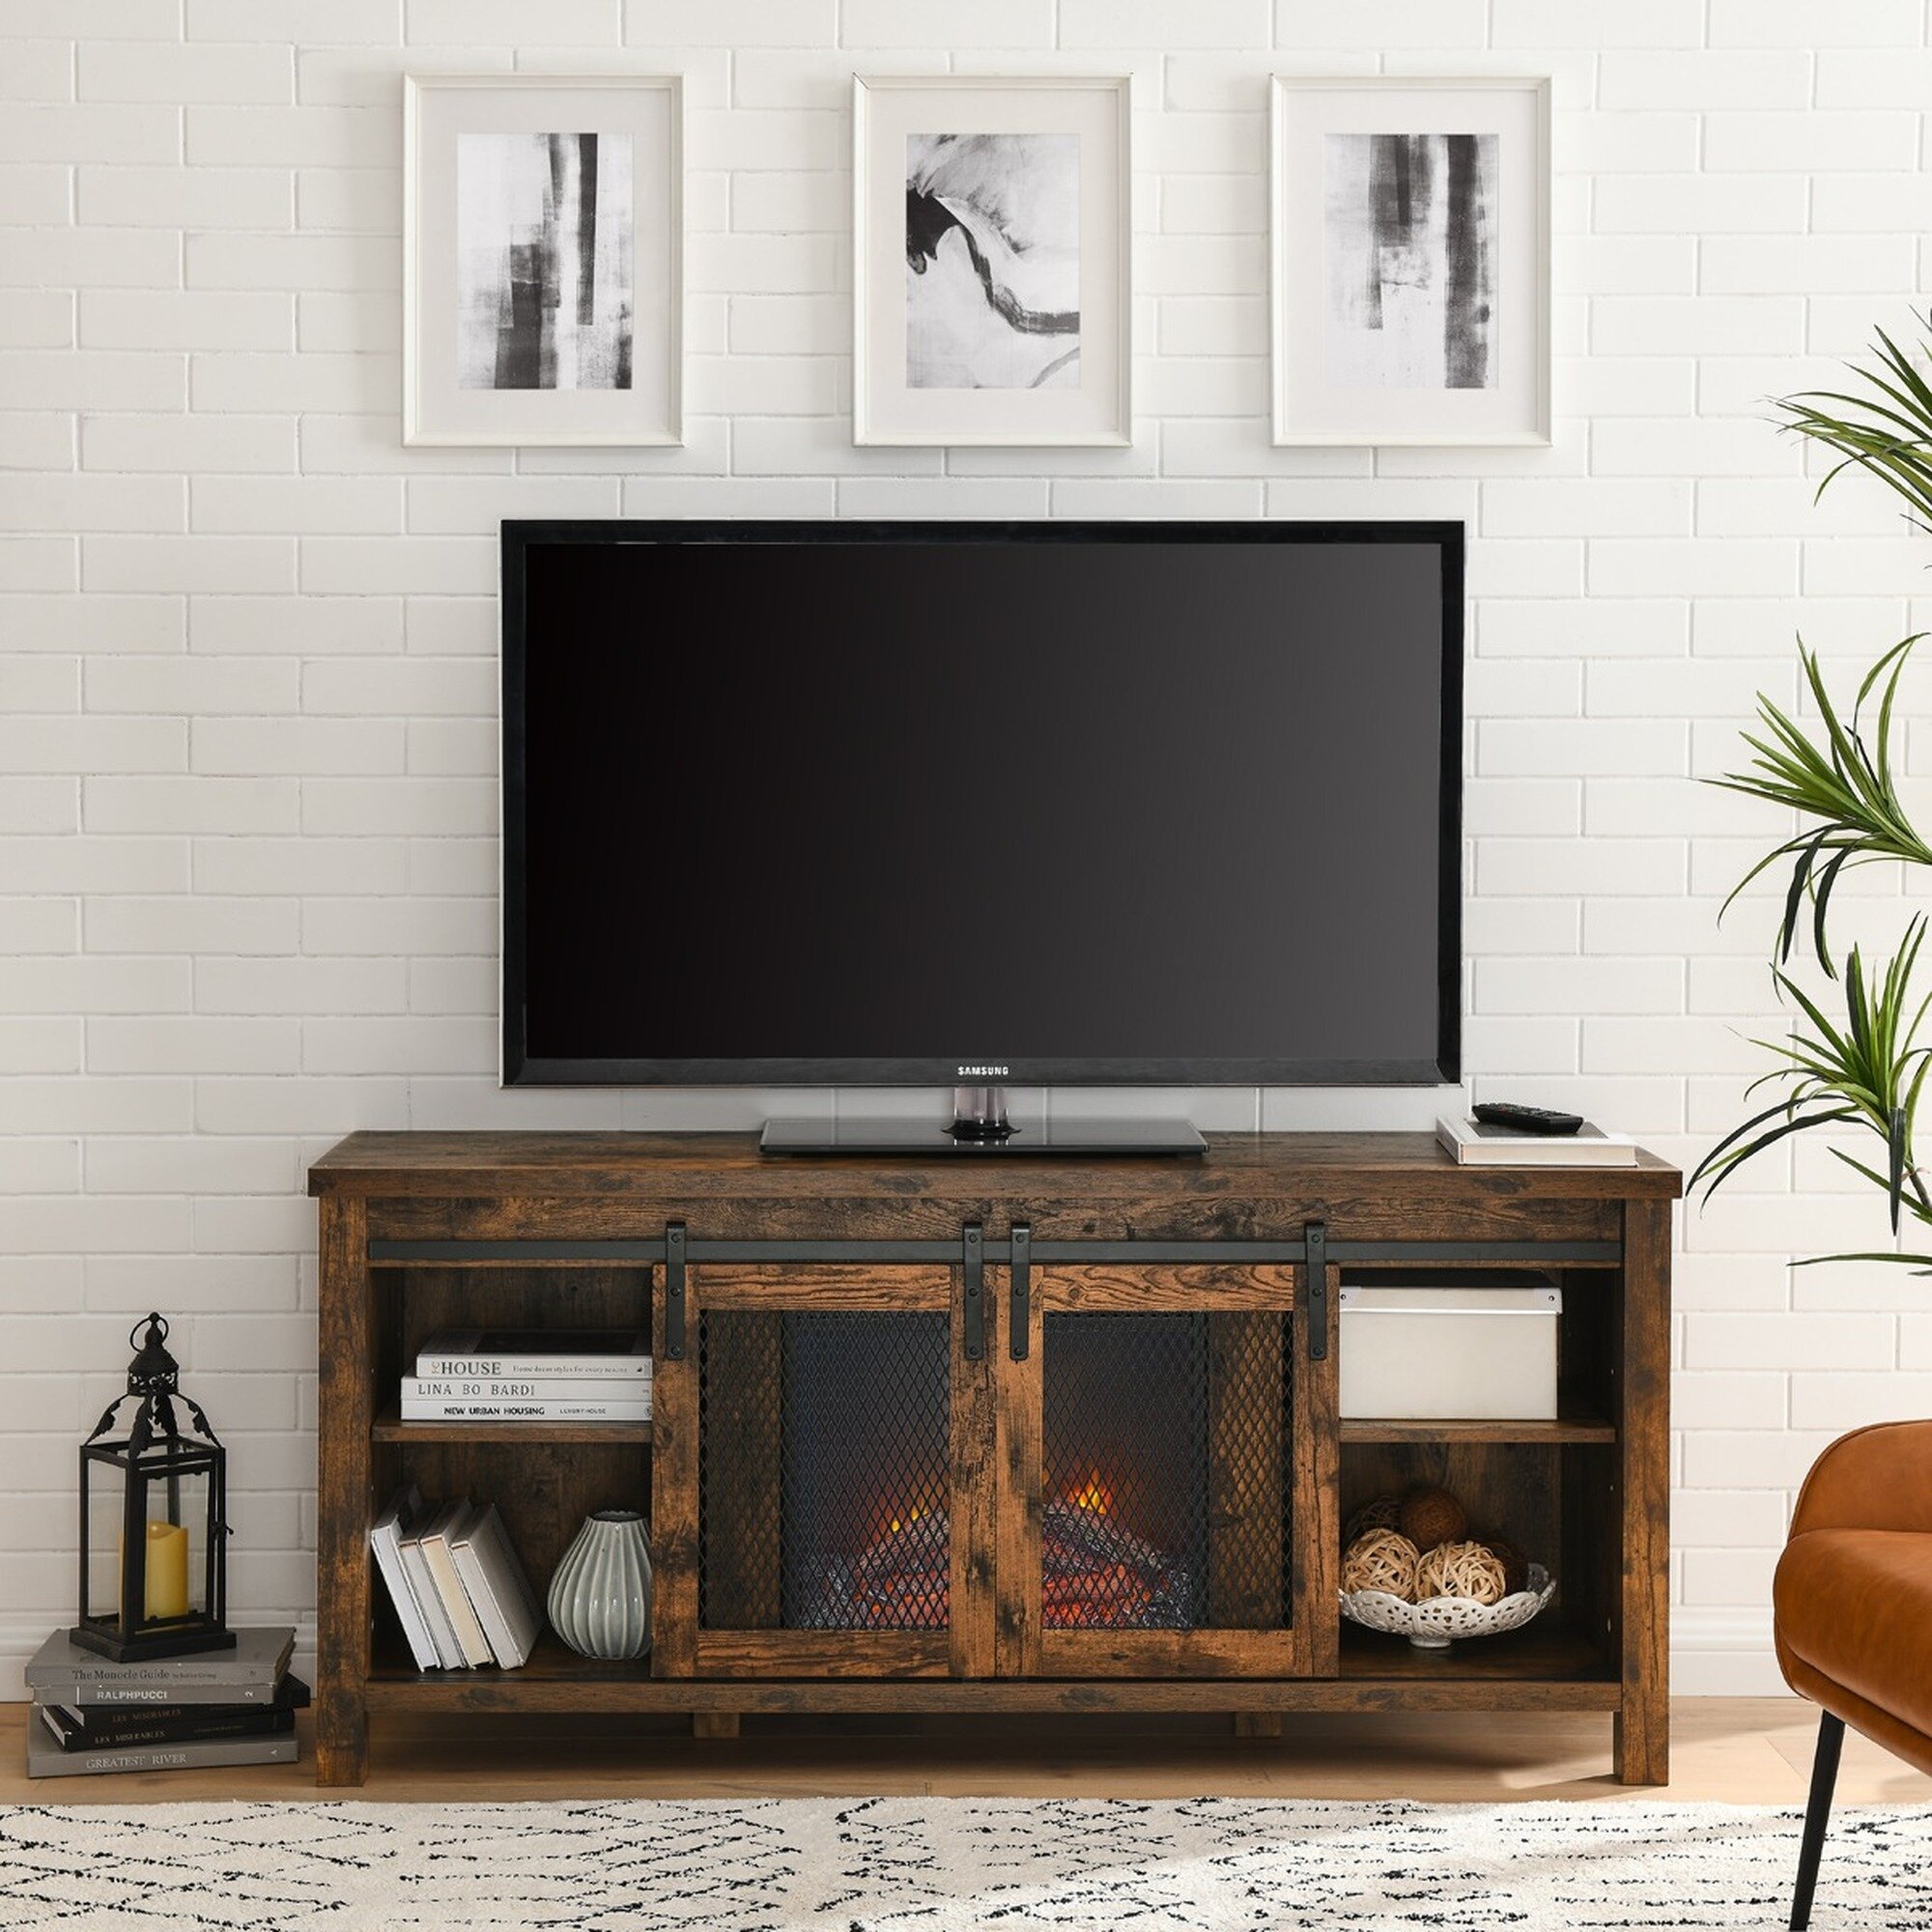 Details about   TVs up to 55" Ideal TV Stand for Flat Screens Multiple Finishes DiningRoom black 